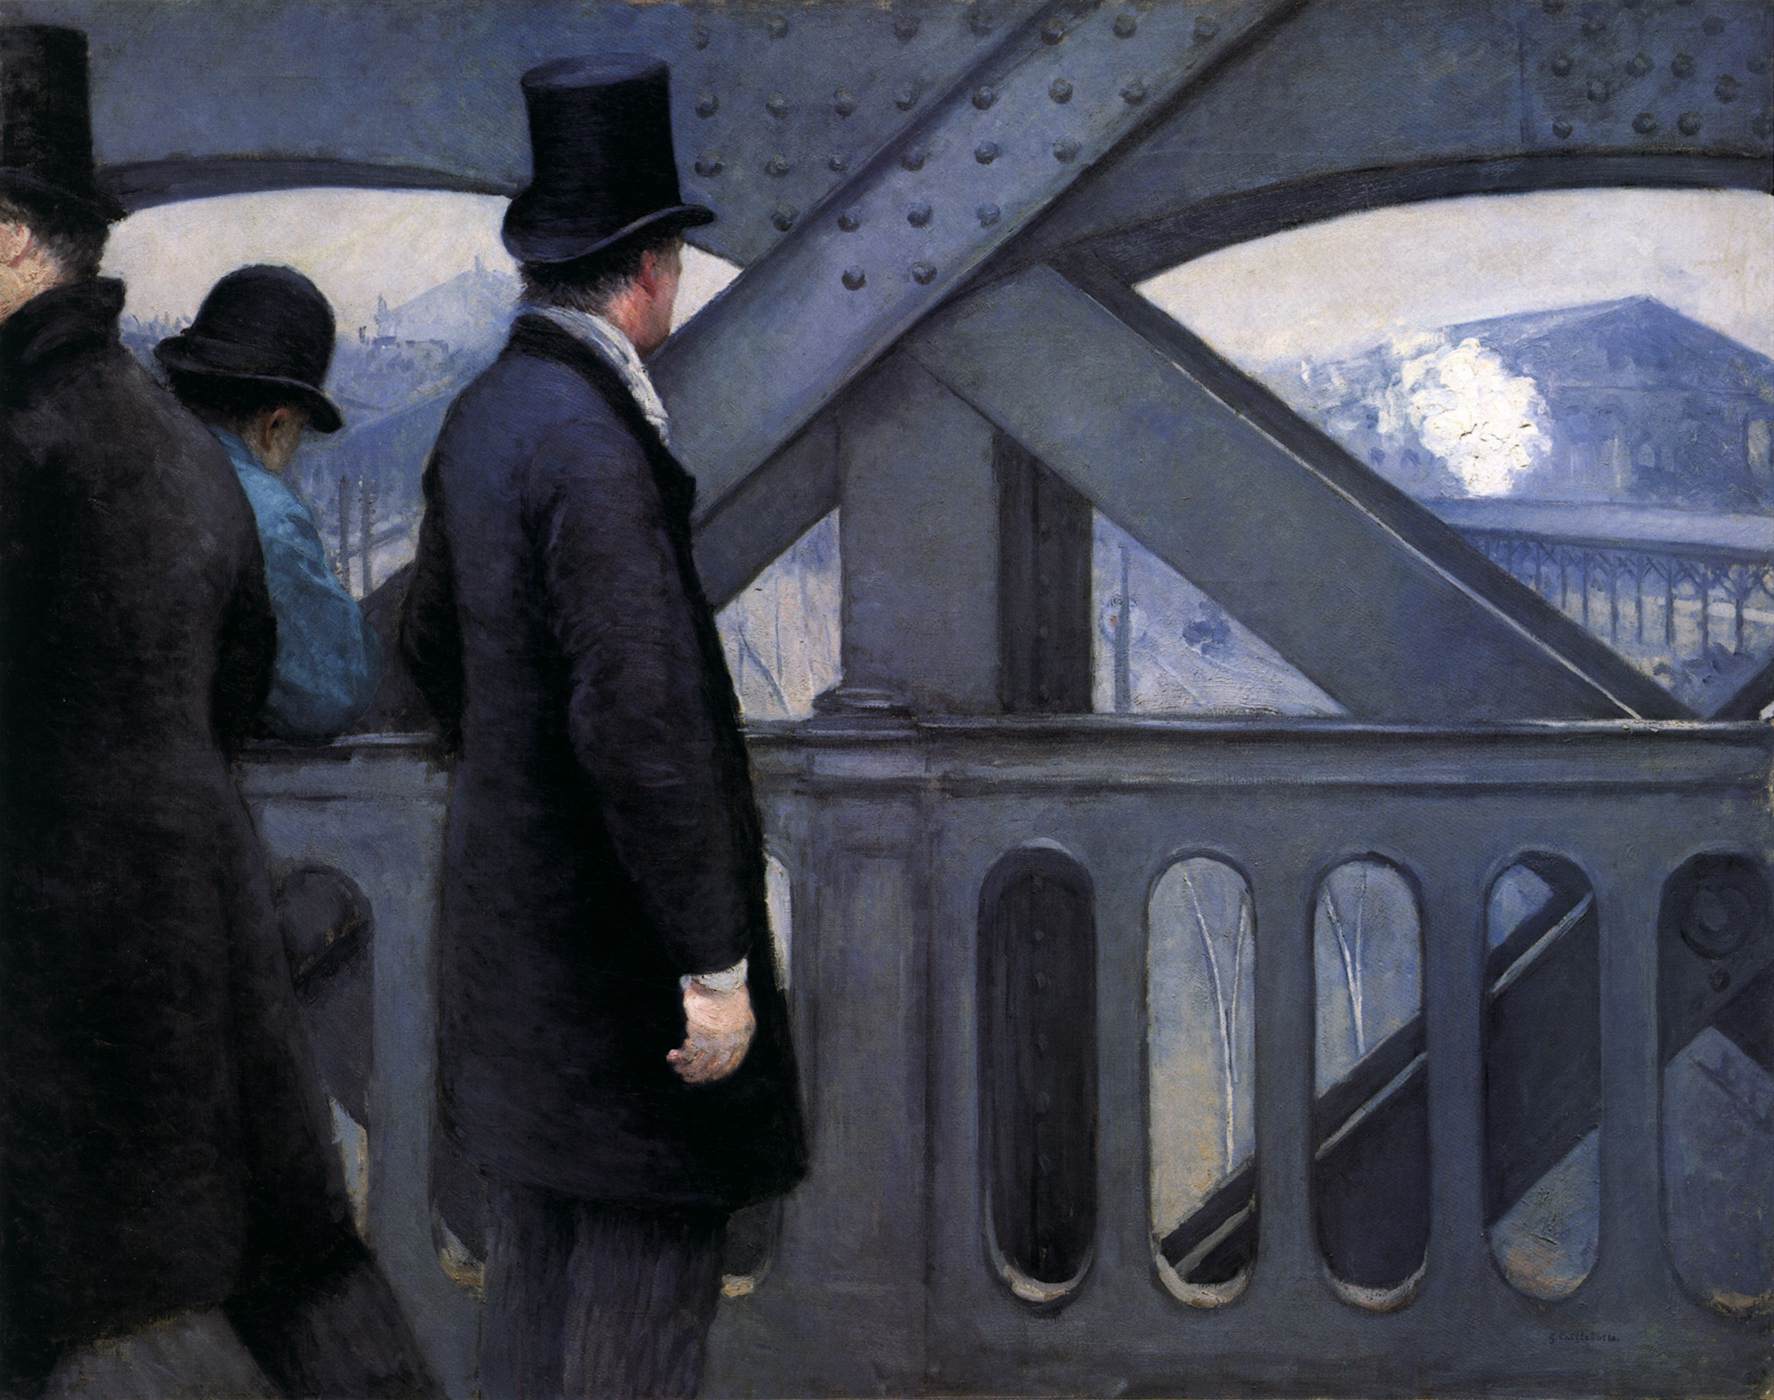 A Pont de l’Europe by Gustave Caillebotte - 1876-77 Kimbell Art Museum